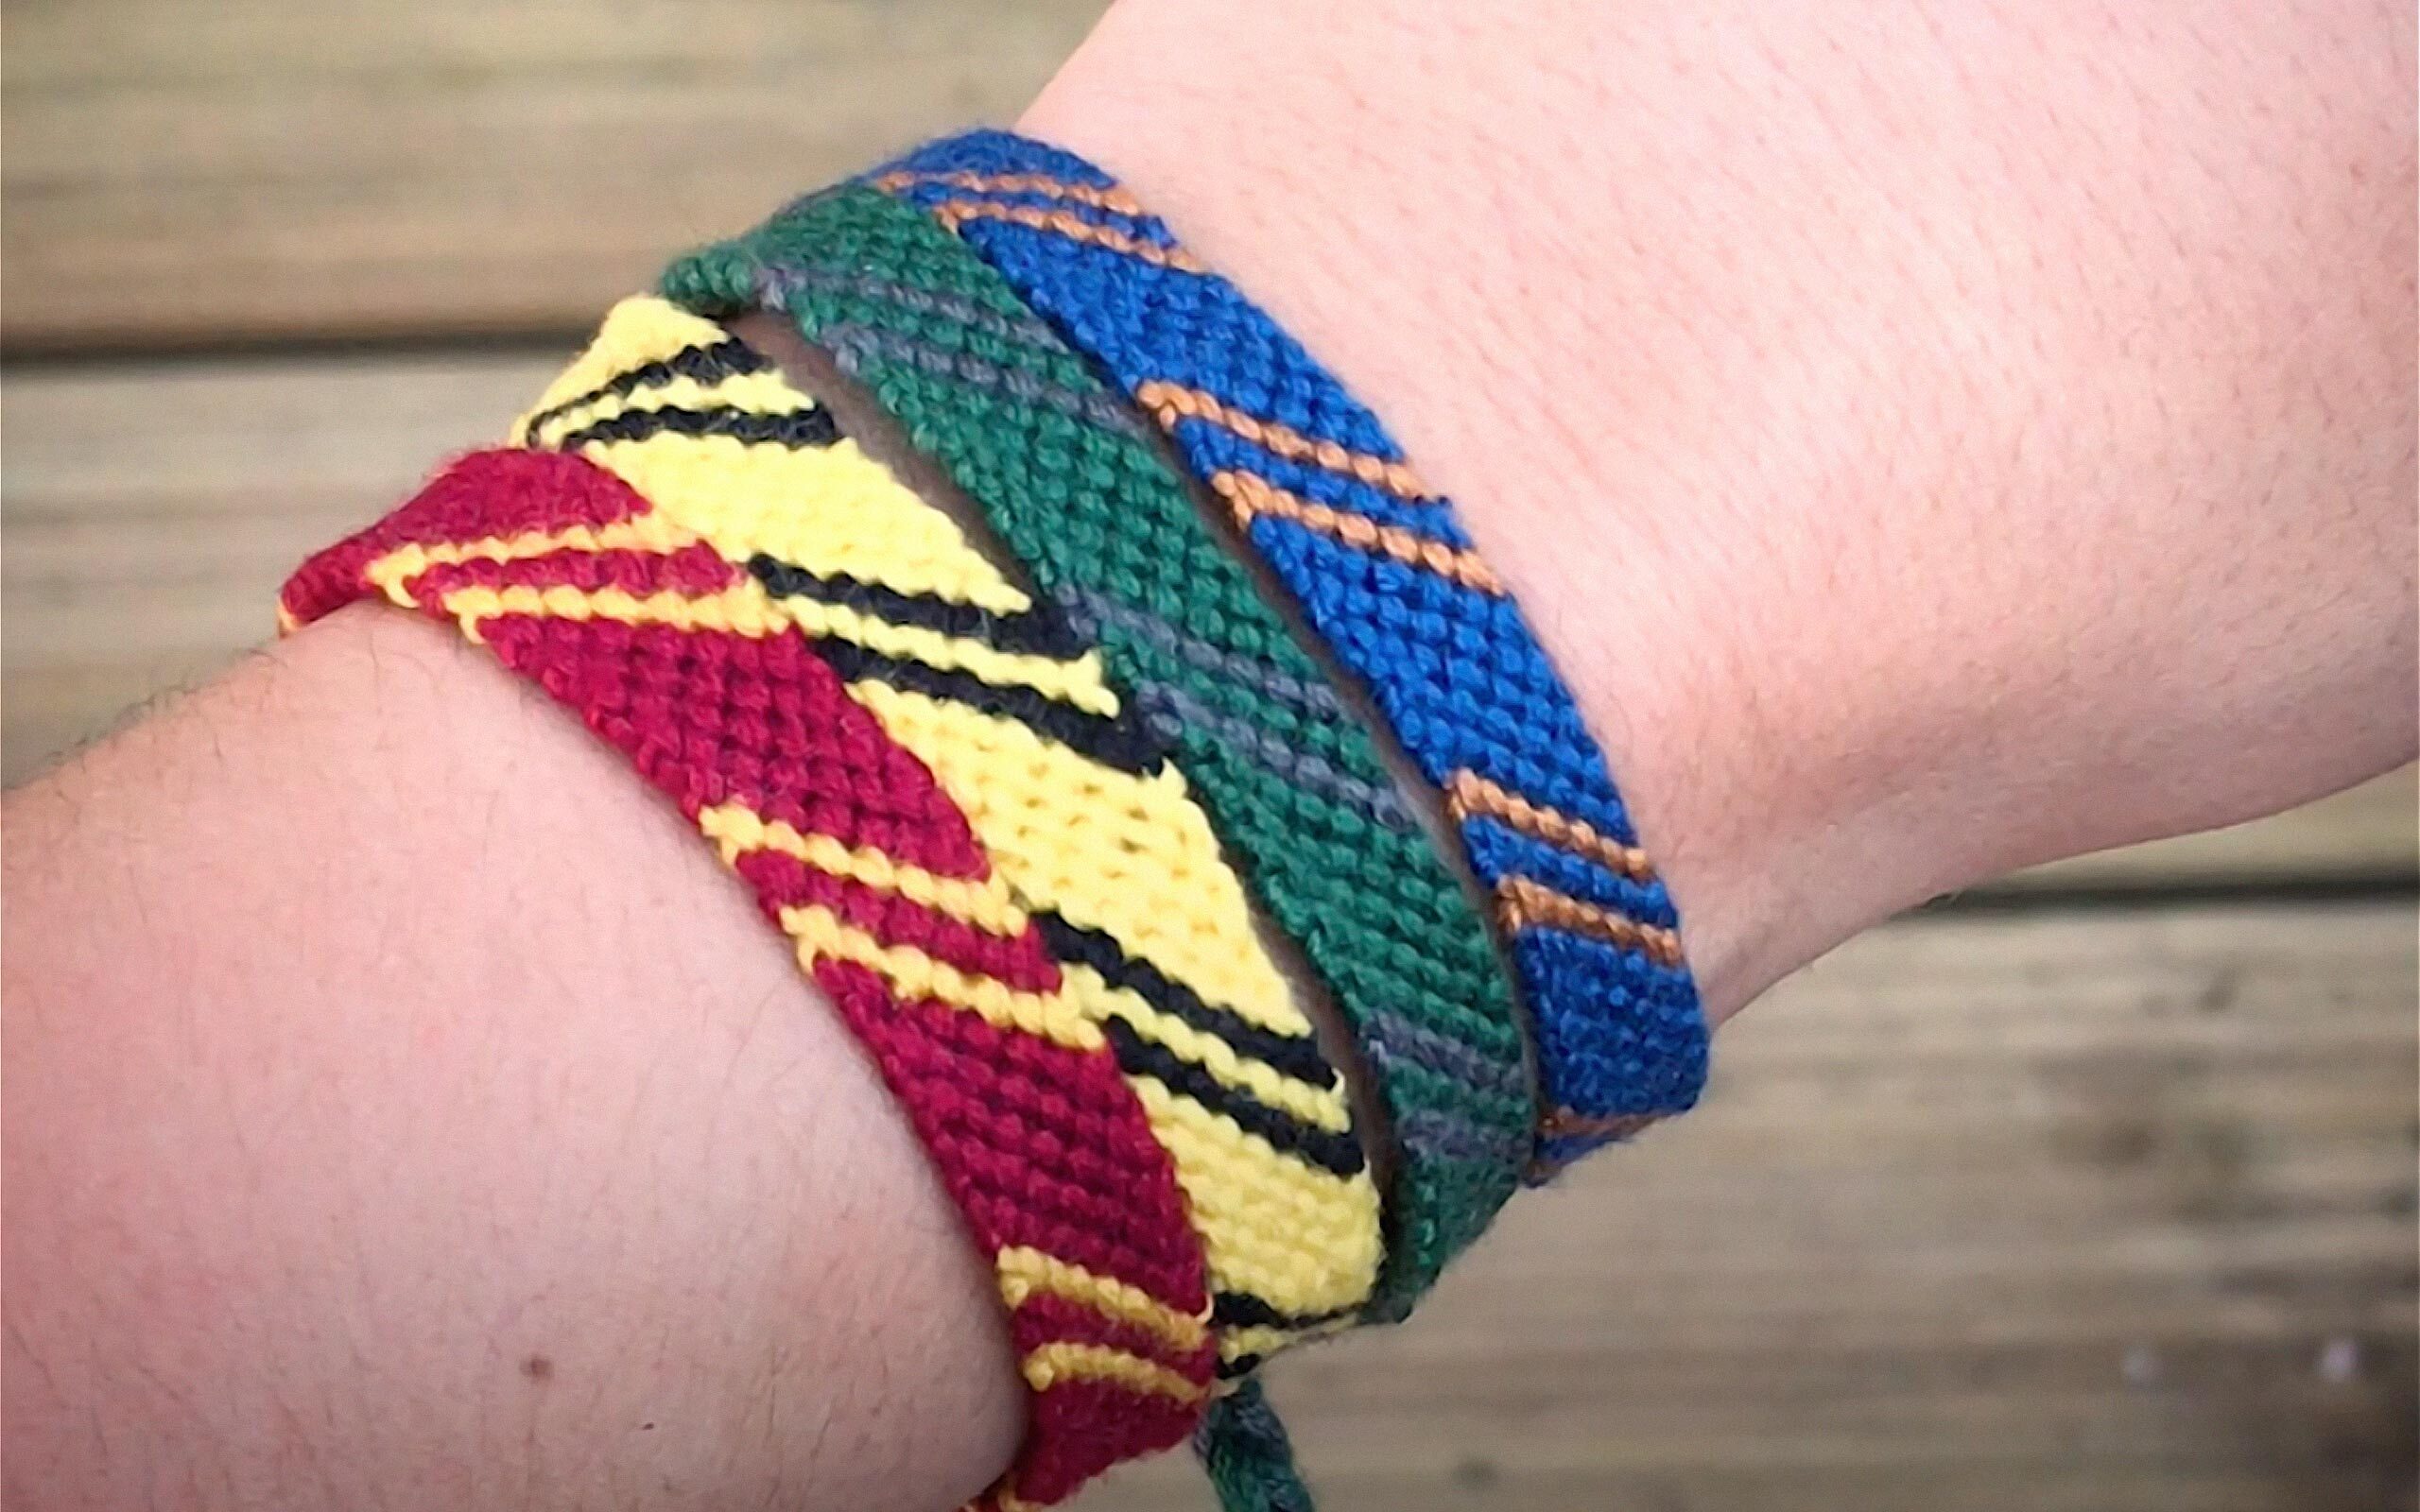 Learn To Make Bracelets That Show Off Your Hogwarts House Colours Wizarding World Be the first to own this truly magical bracelet!! hogwarts house colours